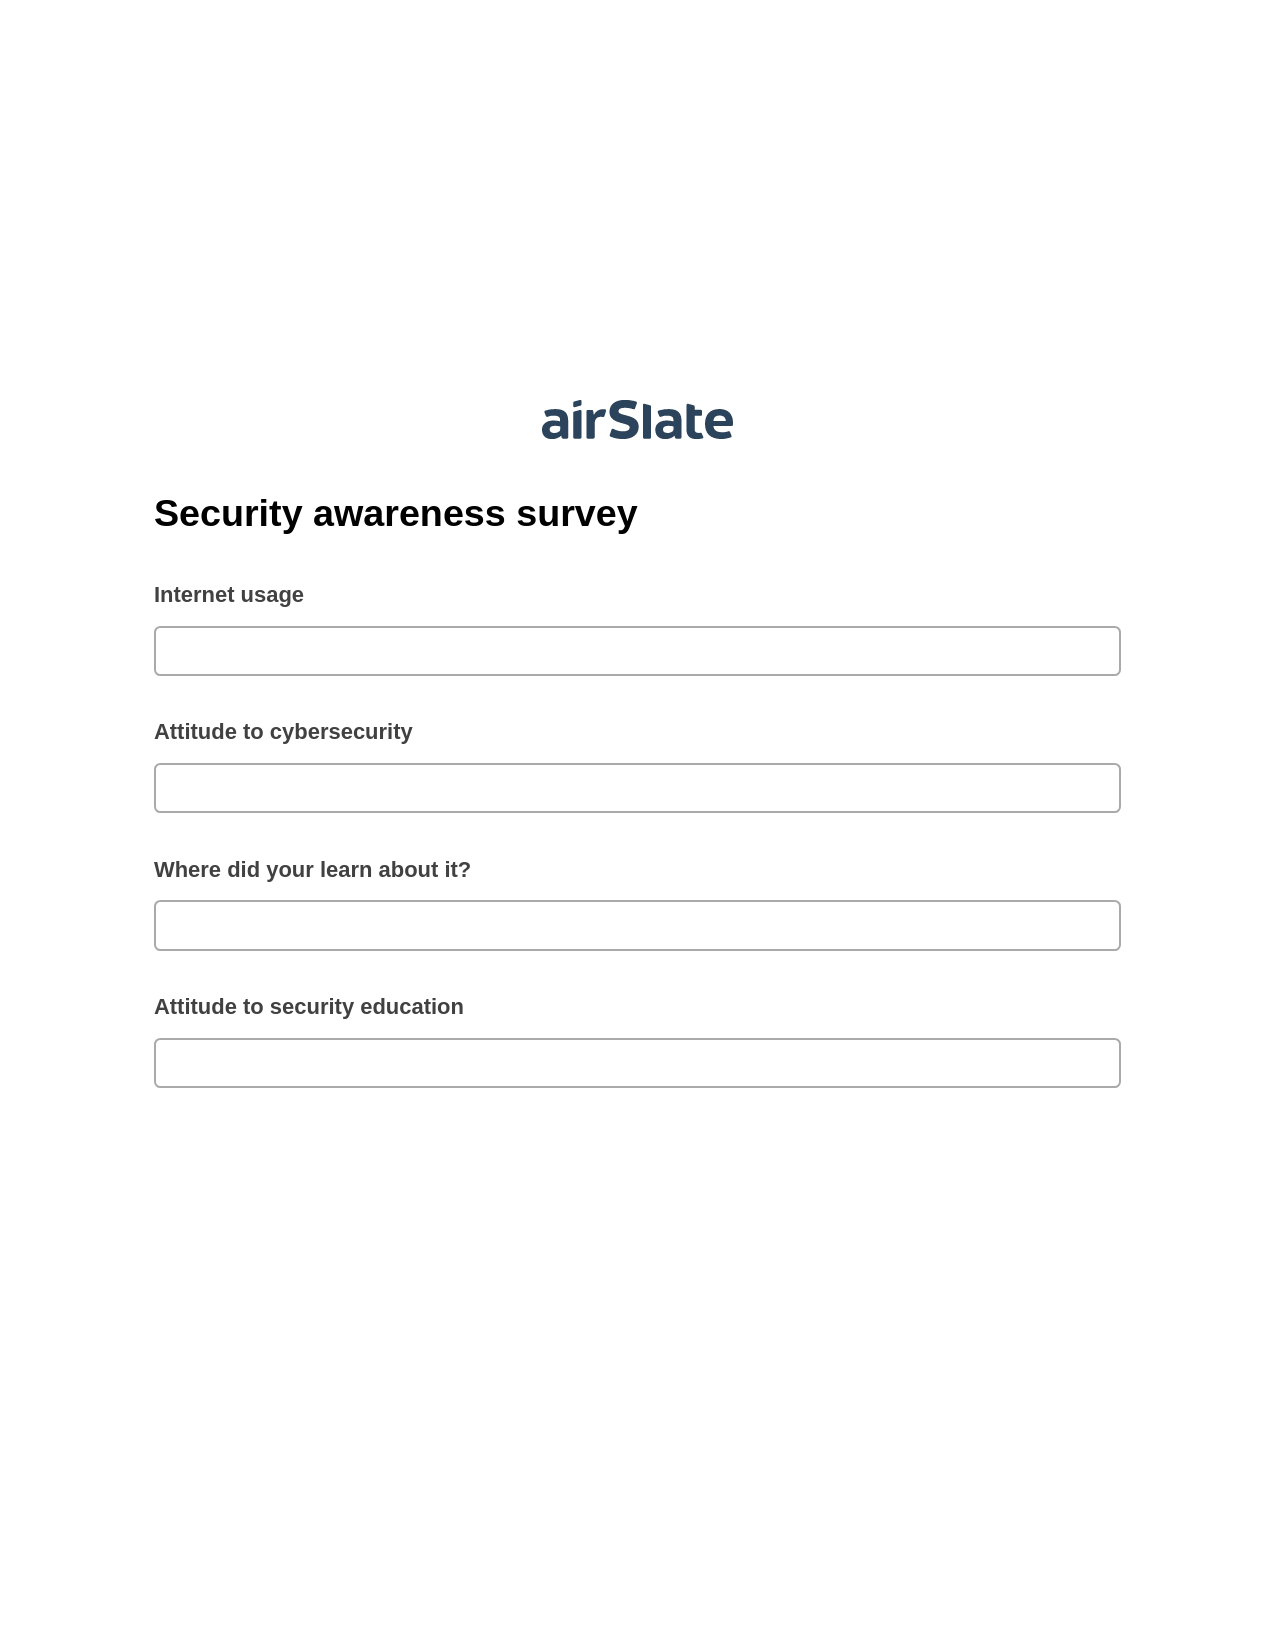 Security awareness survey Pre-fill from MS Dynamics 365 Records DEPRECATED, Lock the slate bot, Slack Two-Way Binding Bot